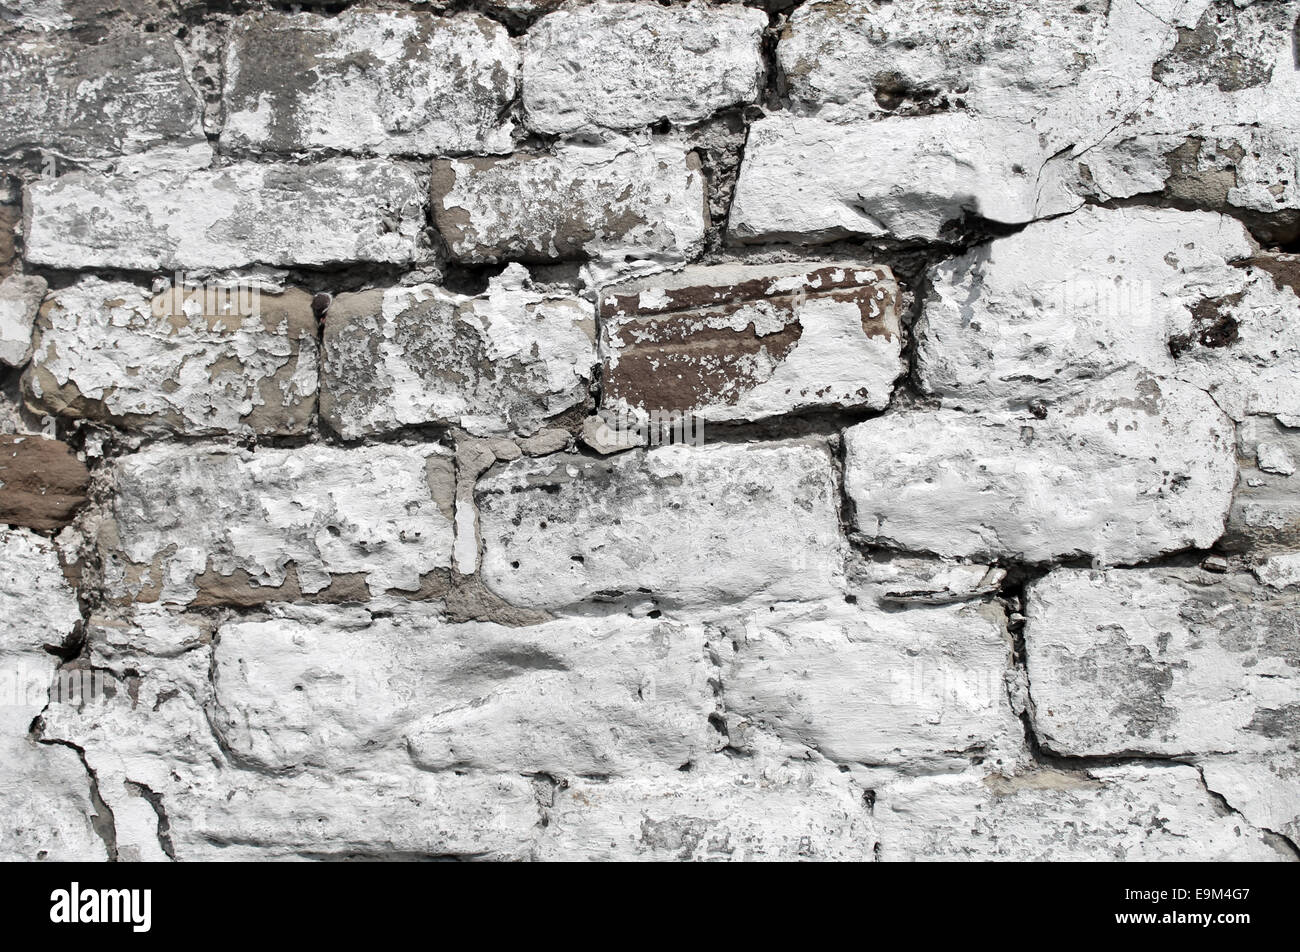 Abstract background of a painted white dry stone wall. Stock Photo